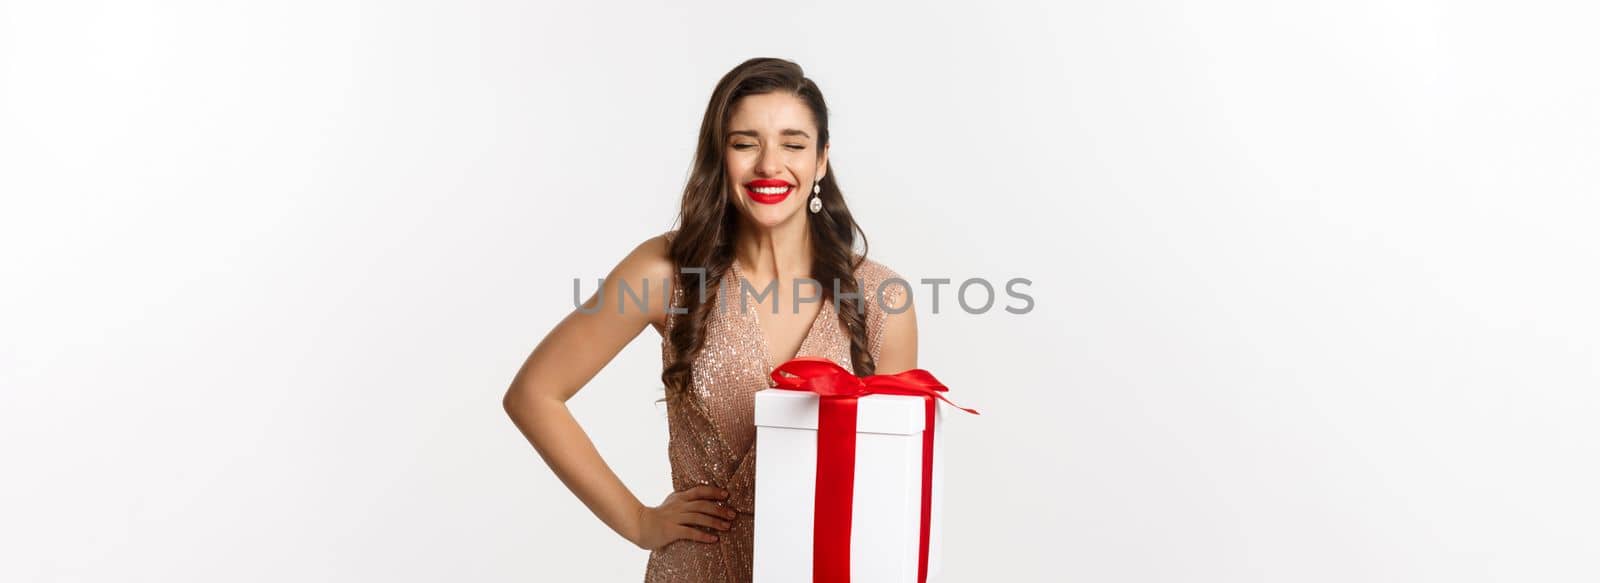 Merry Christmas. Image of attractive woman in luxury dress, celebrating winter holidays, holding gift and laughing from happiness, standing over white background.